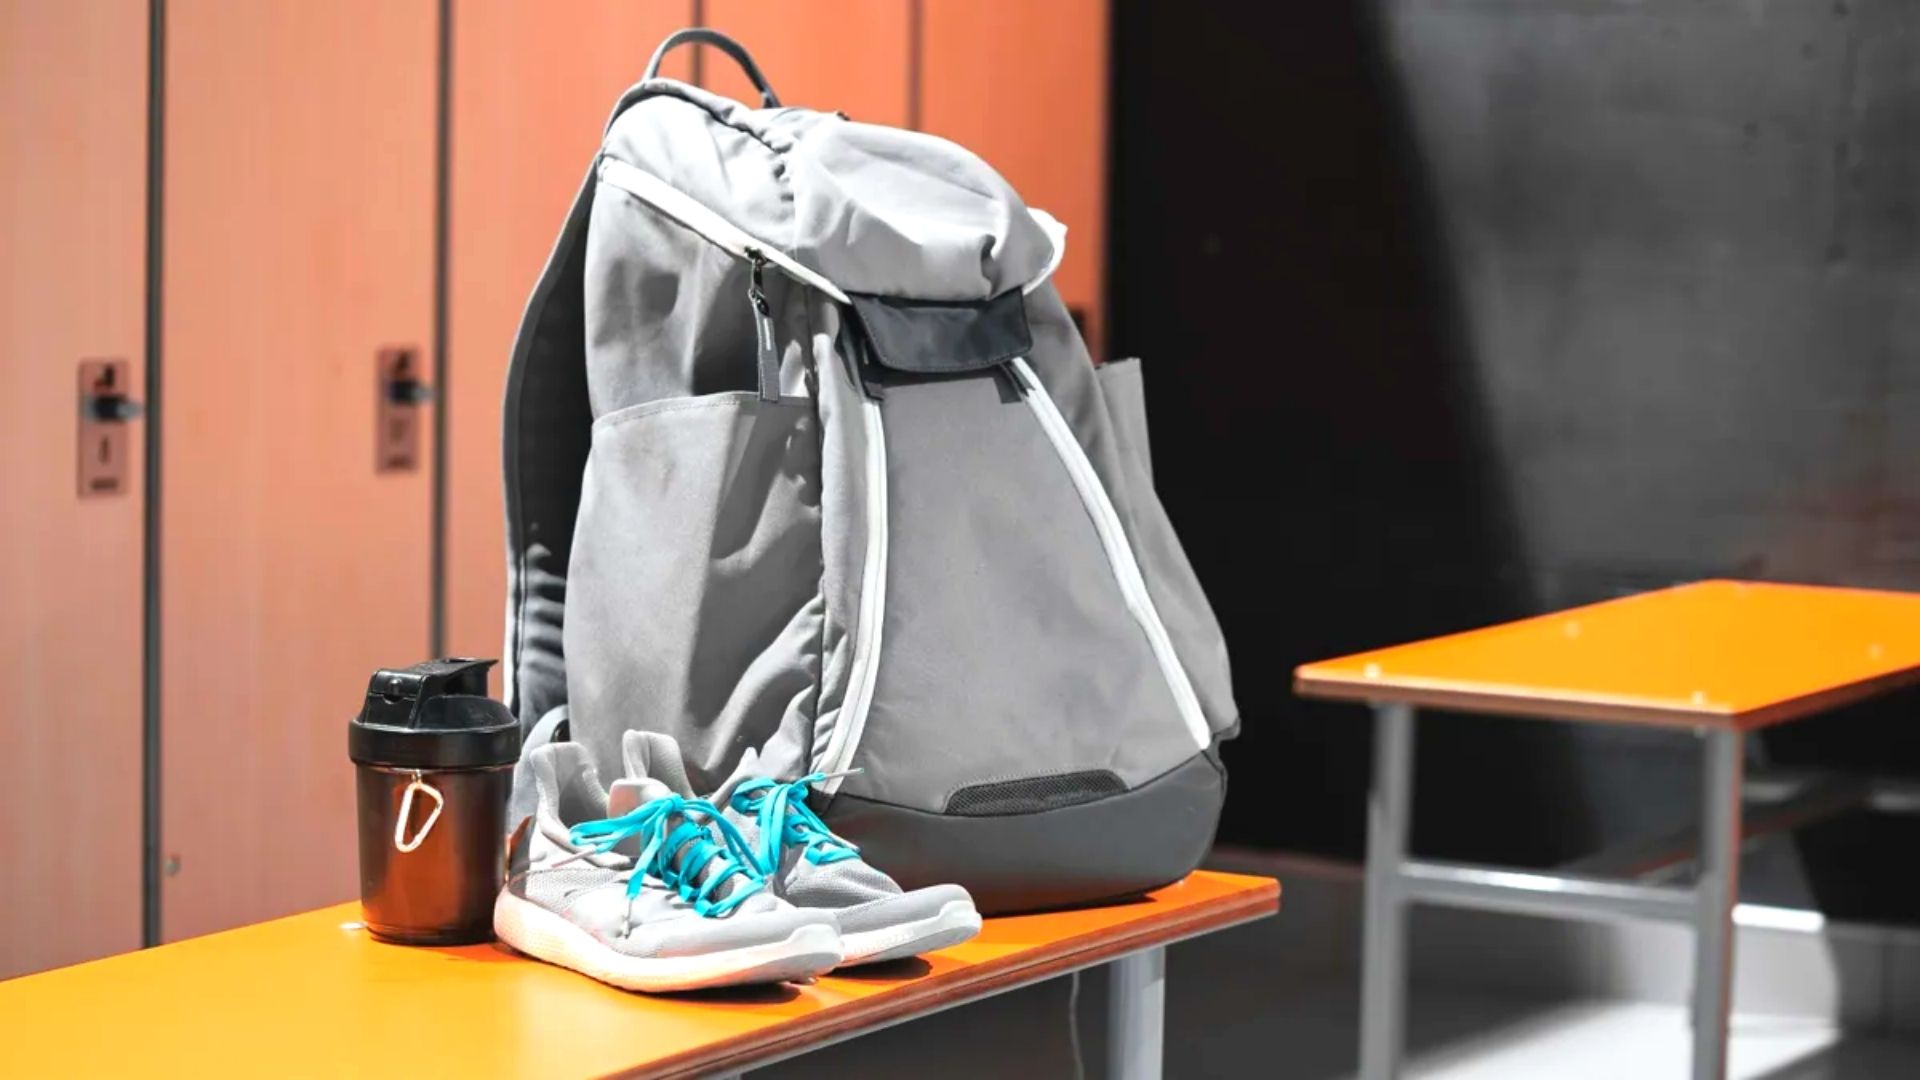 Gym Bag Sitting On Bench With Shoes And Protein Shaker